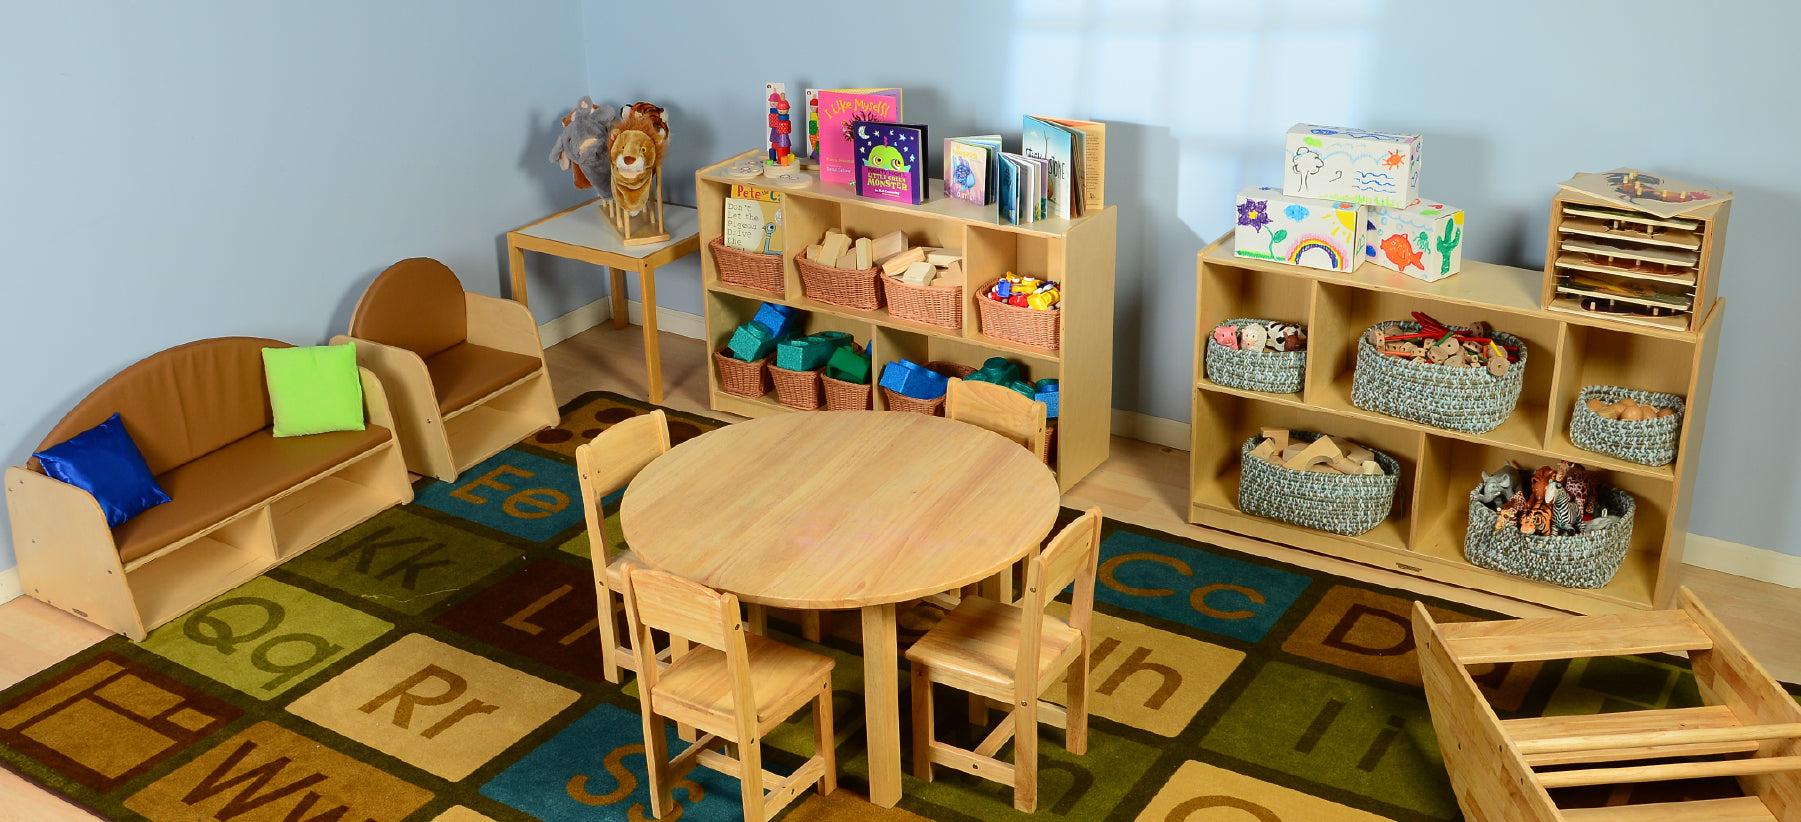 pre-k classroom with tables, couch, chairs and shelving